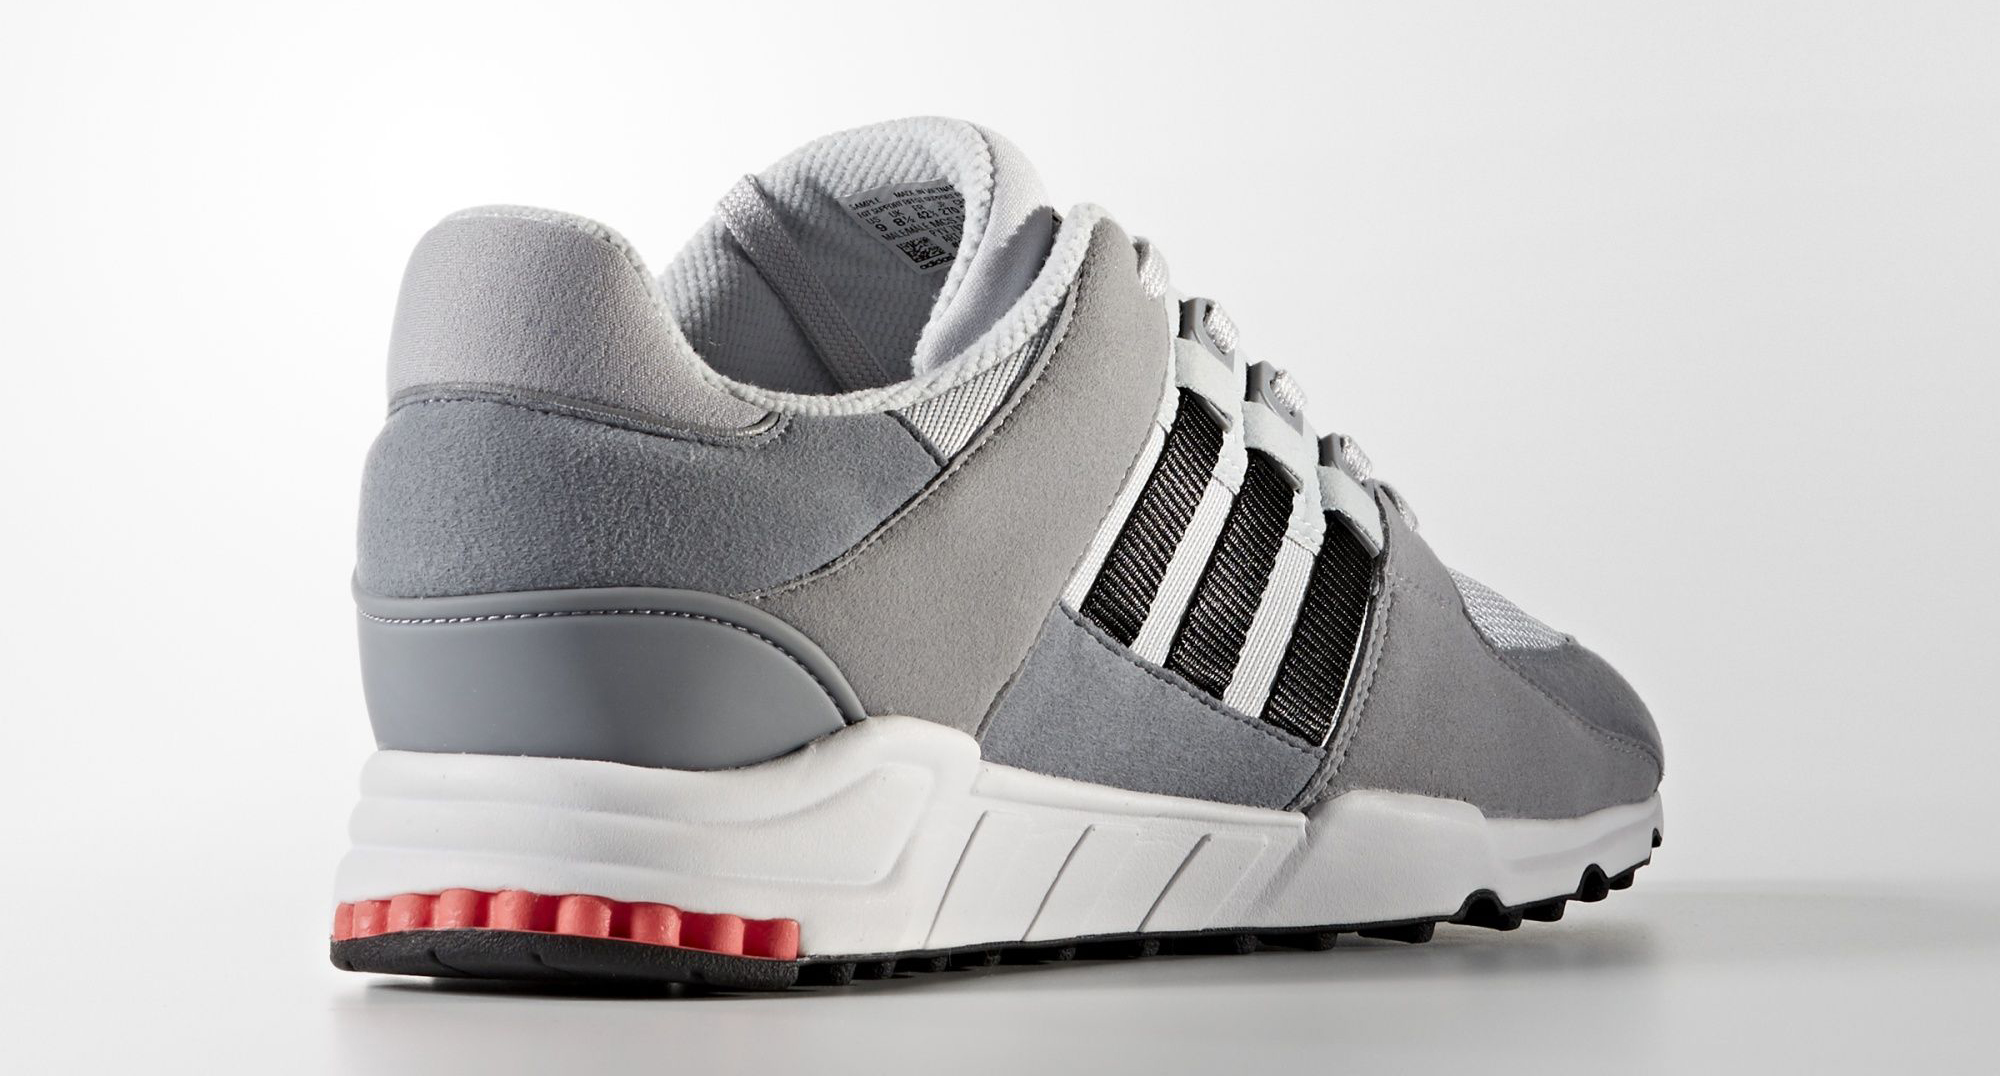 adidas-eqt-support-rf-grey-turbo-red-3